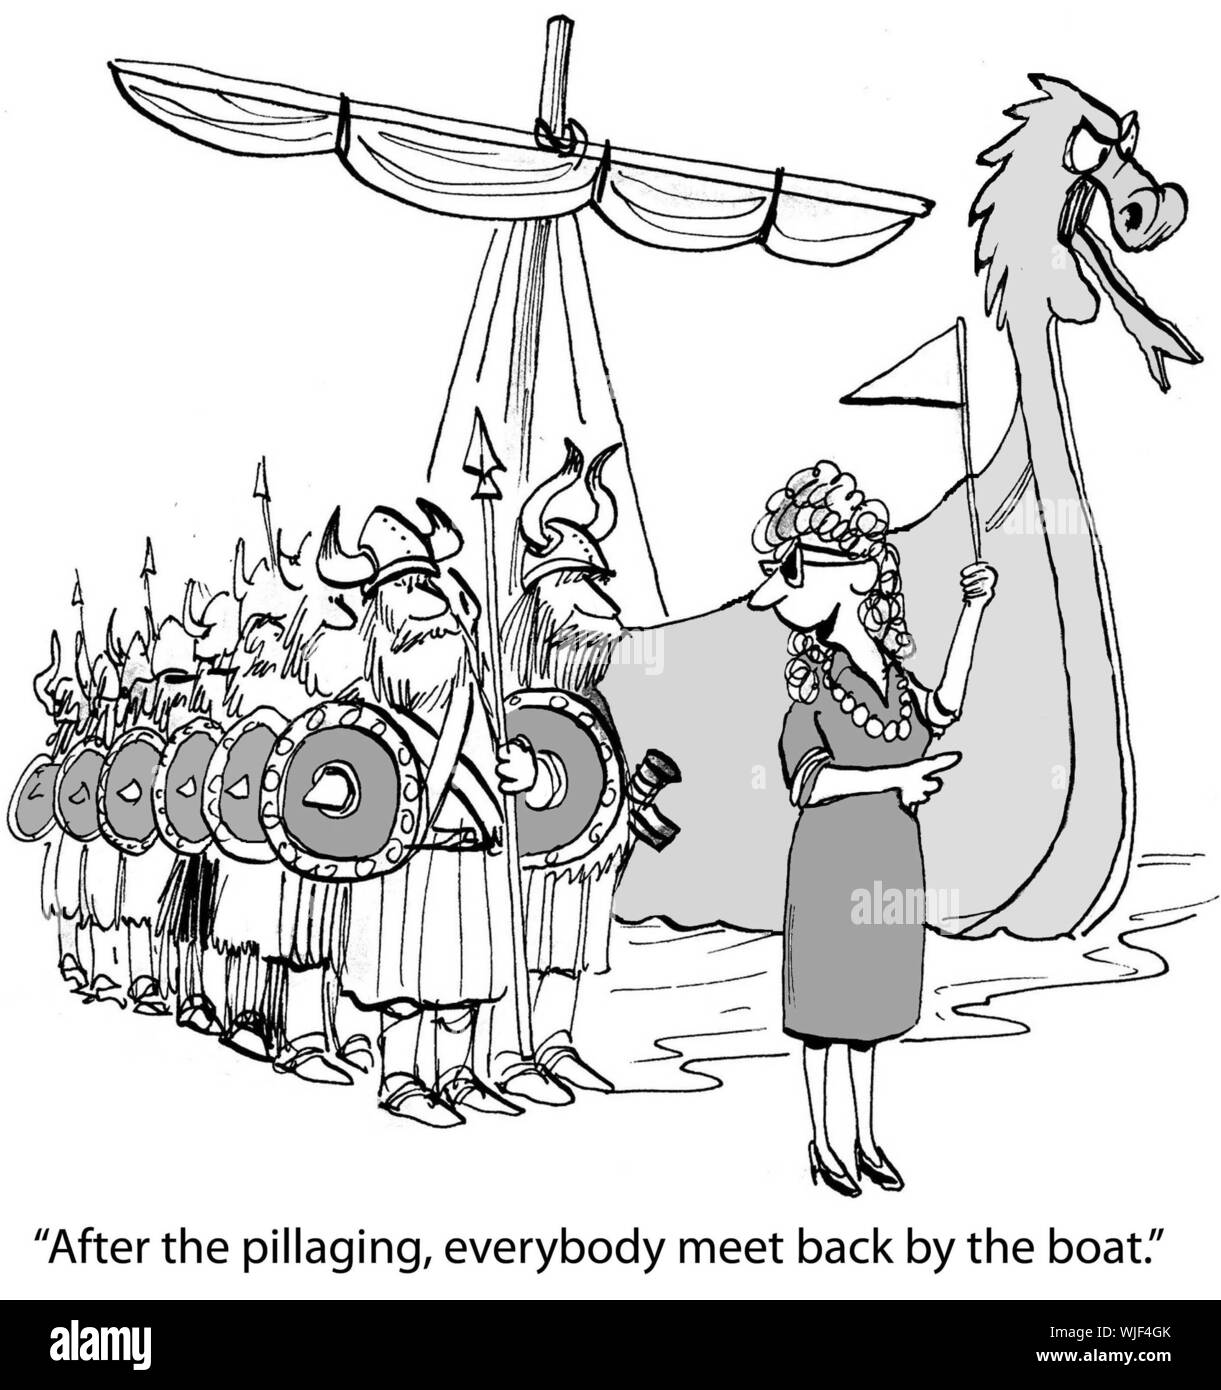 'After the pillaging, everybody meet back by the boat.' Stock Photo